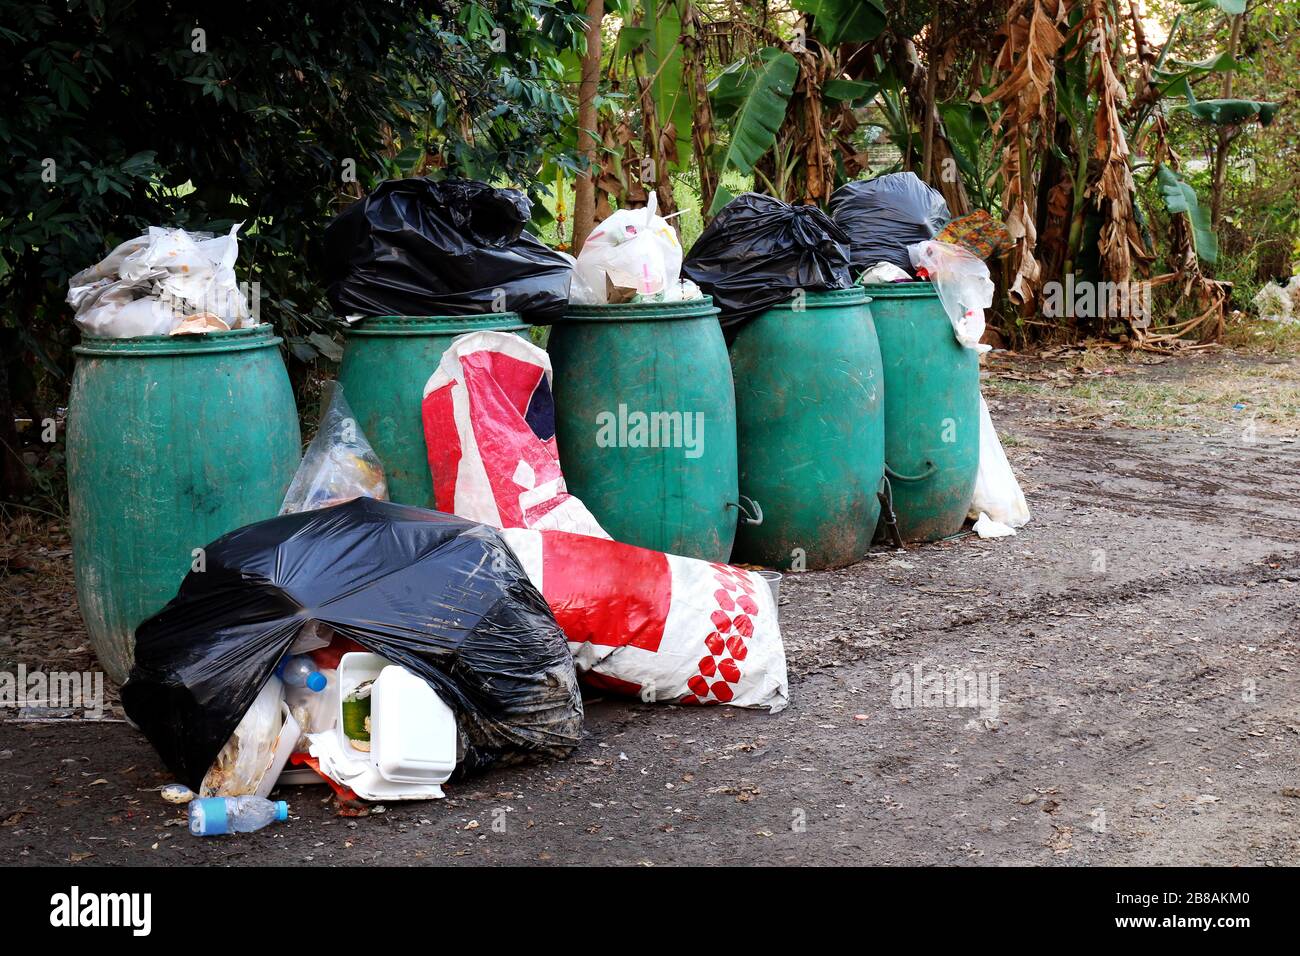 https://c8.alamy.com/comp/2B8AKM0/bin-bin-trash-and-many-pile-of-garbage-bags-on-the-ground-bin-waste-plastic-for-recycle-garbage-waste-many-pollution-waste-in-village-2B8AKM0.jpg